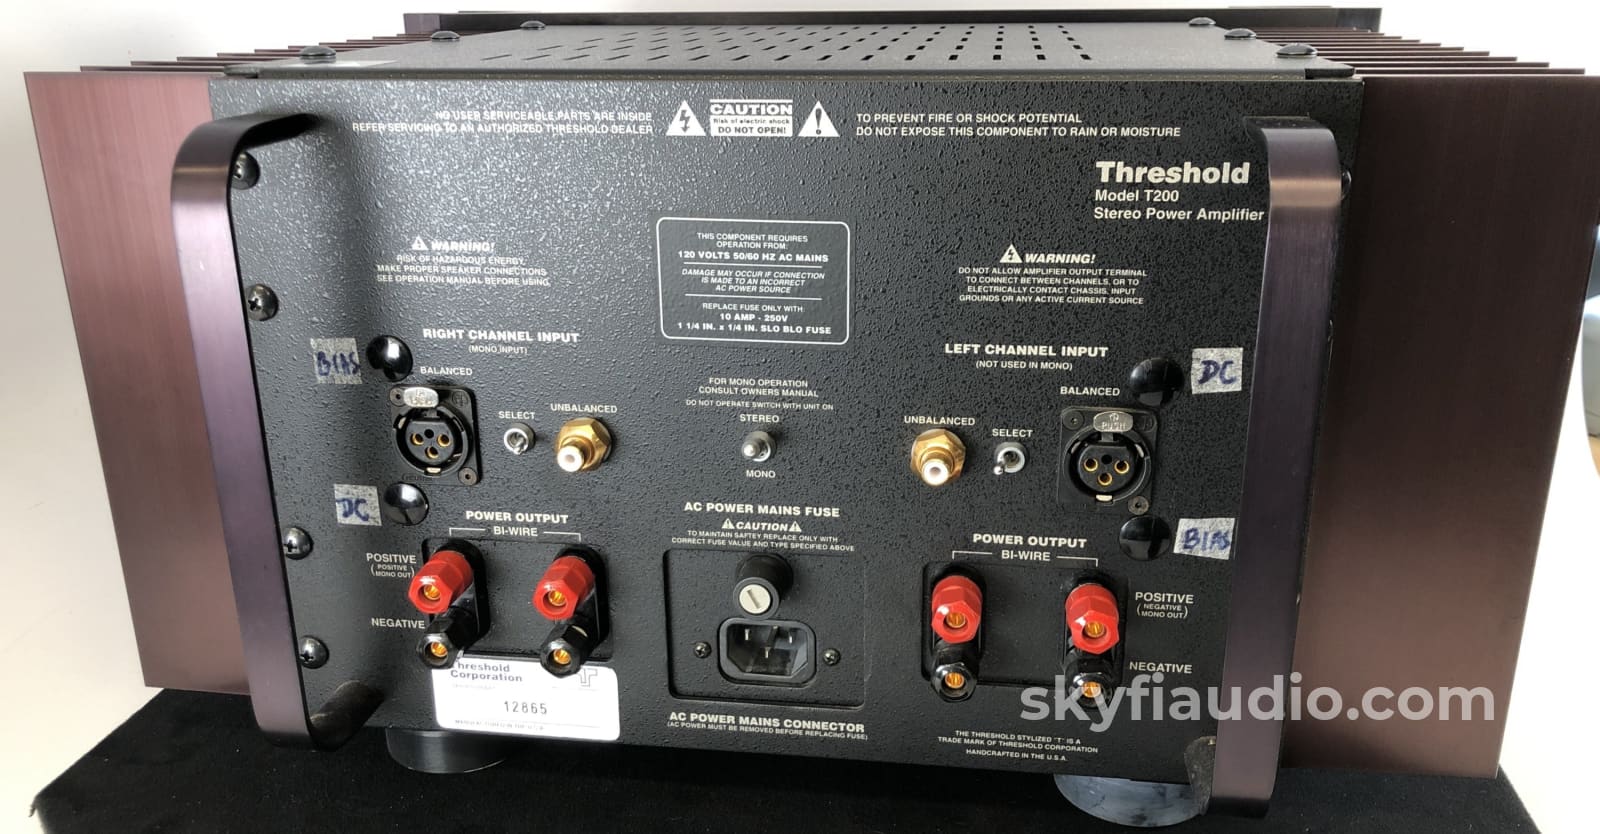 Threshold T-200 Vintage Solid State Amplifier - Stereophile Class A!